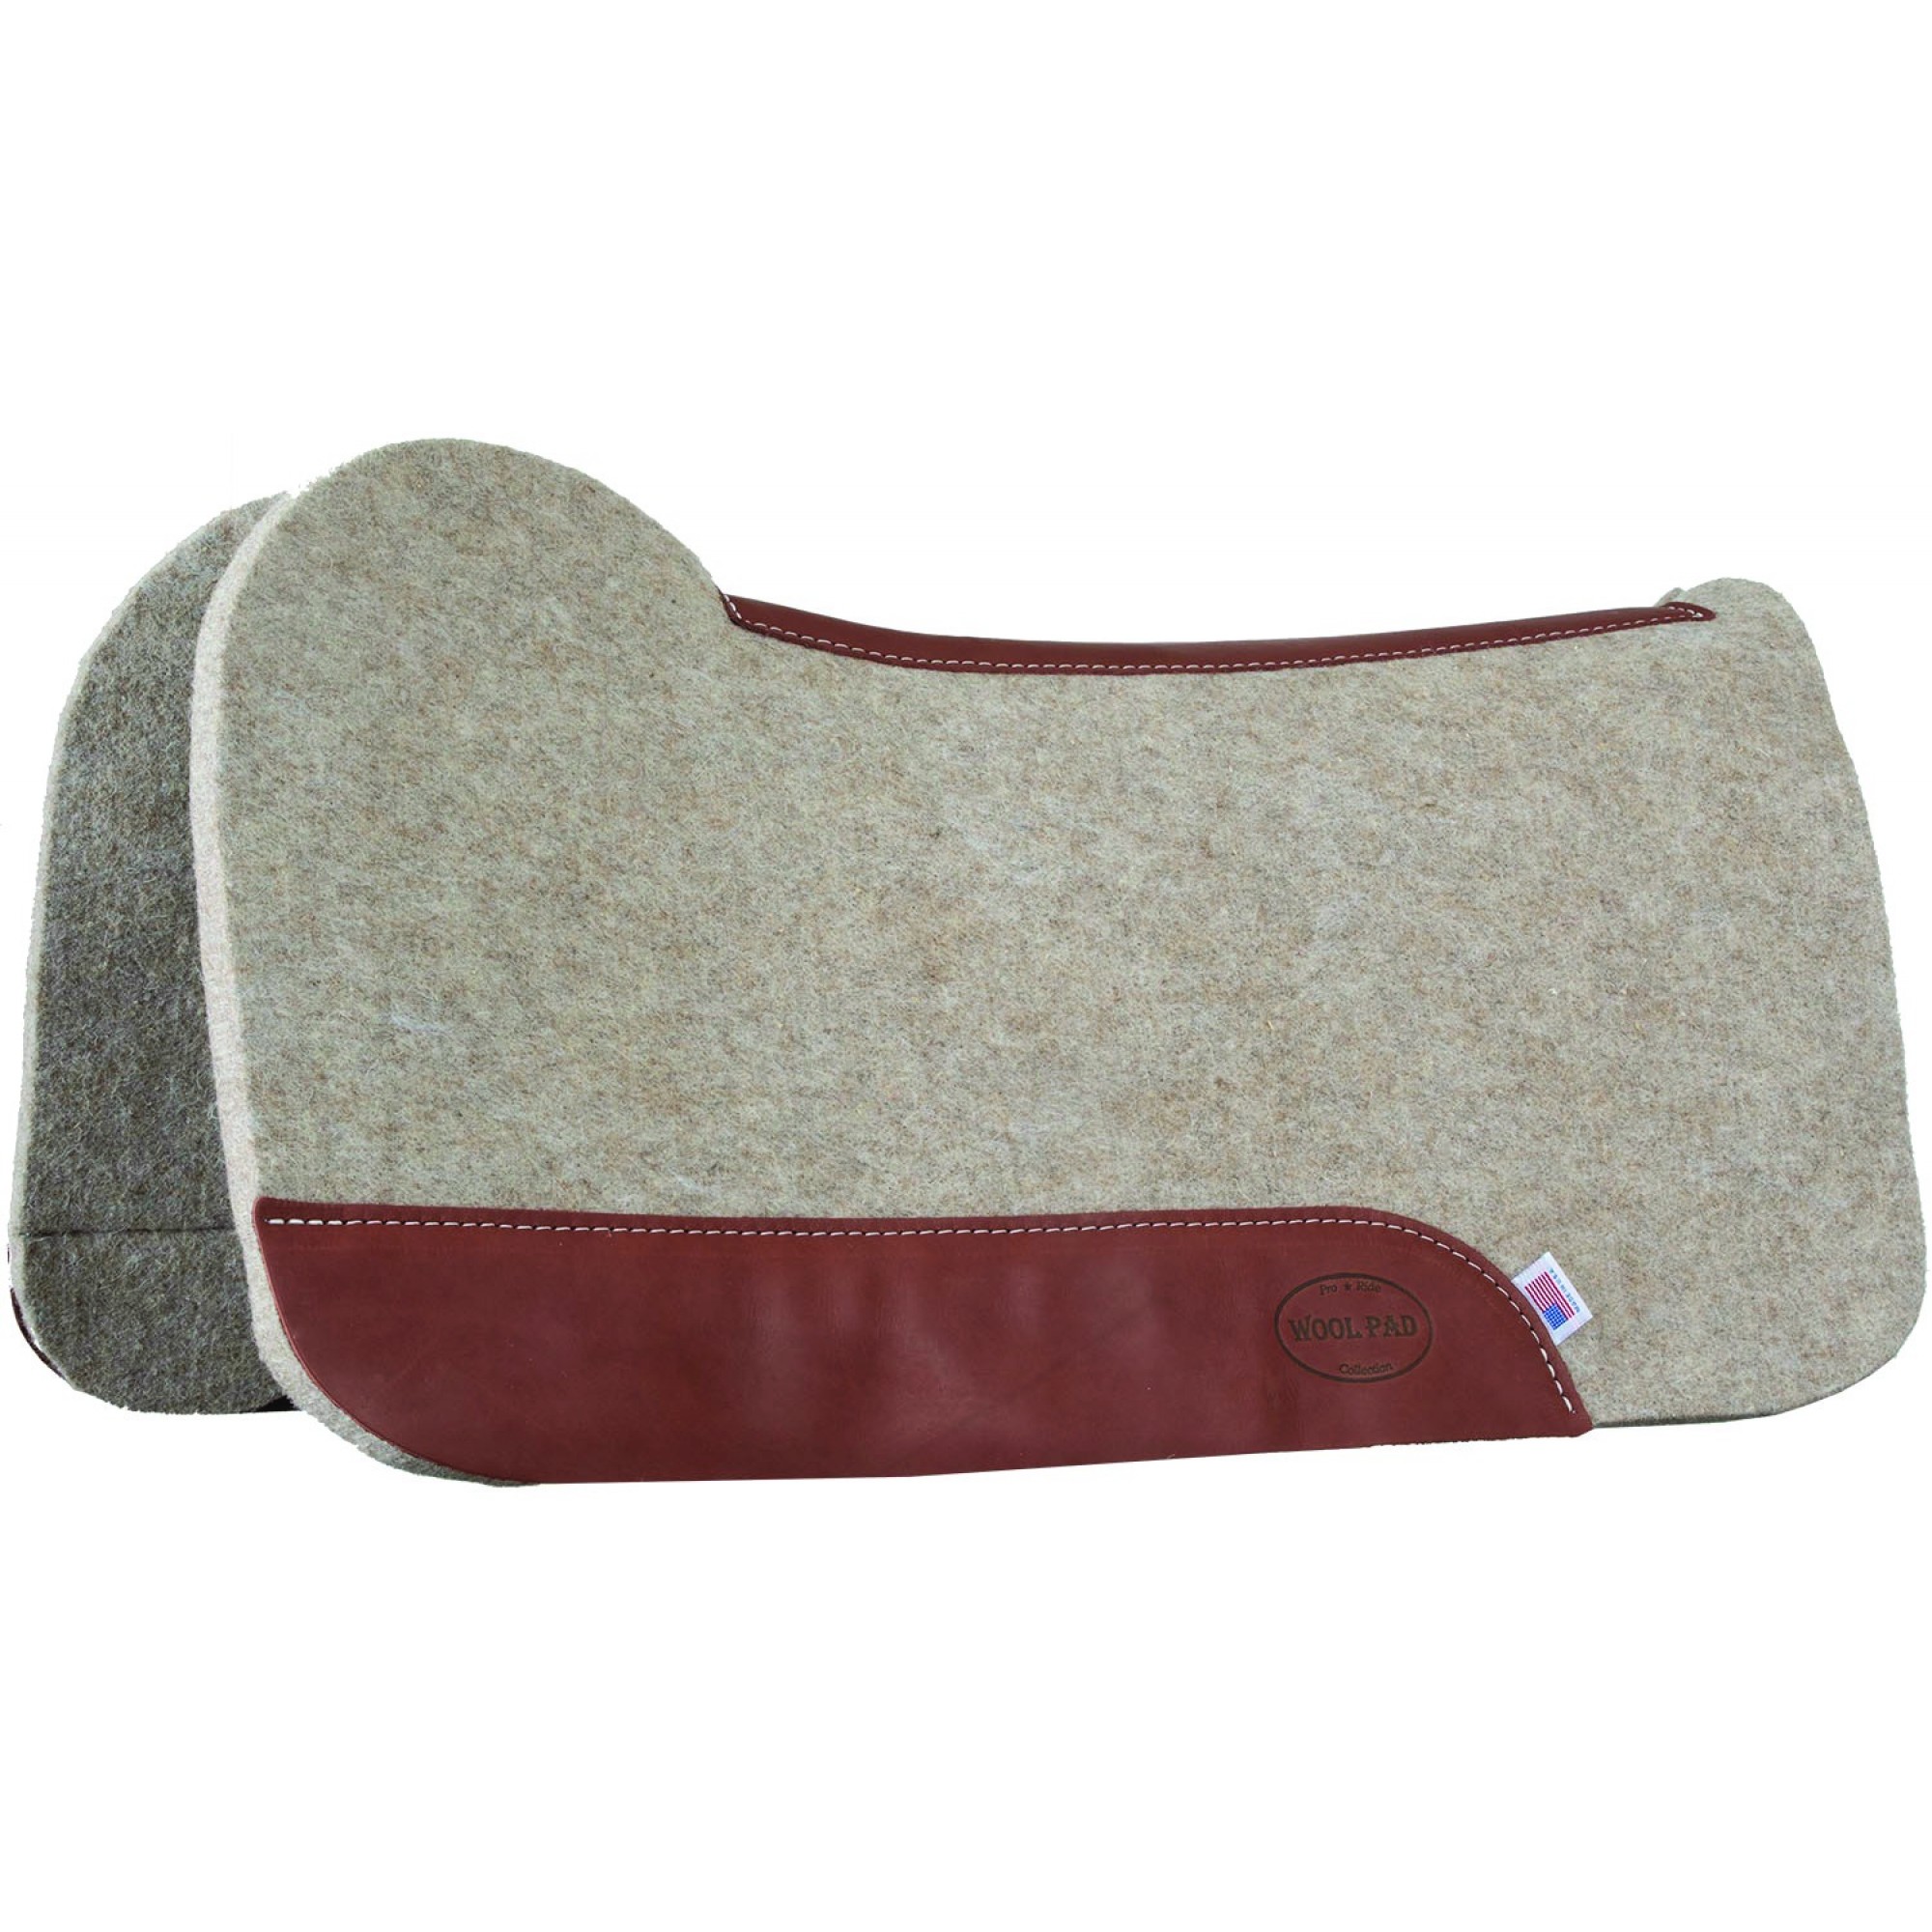 Mustang Heavy Weight 100% Wool Contoured Western Horse Saddle Pad Retail $108 